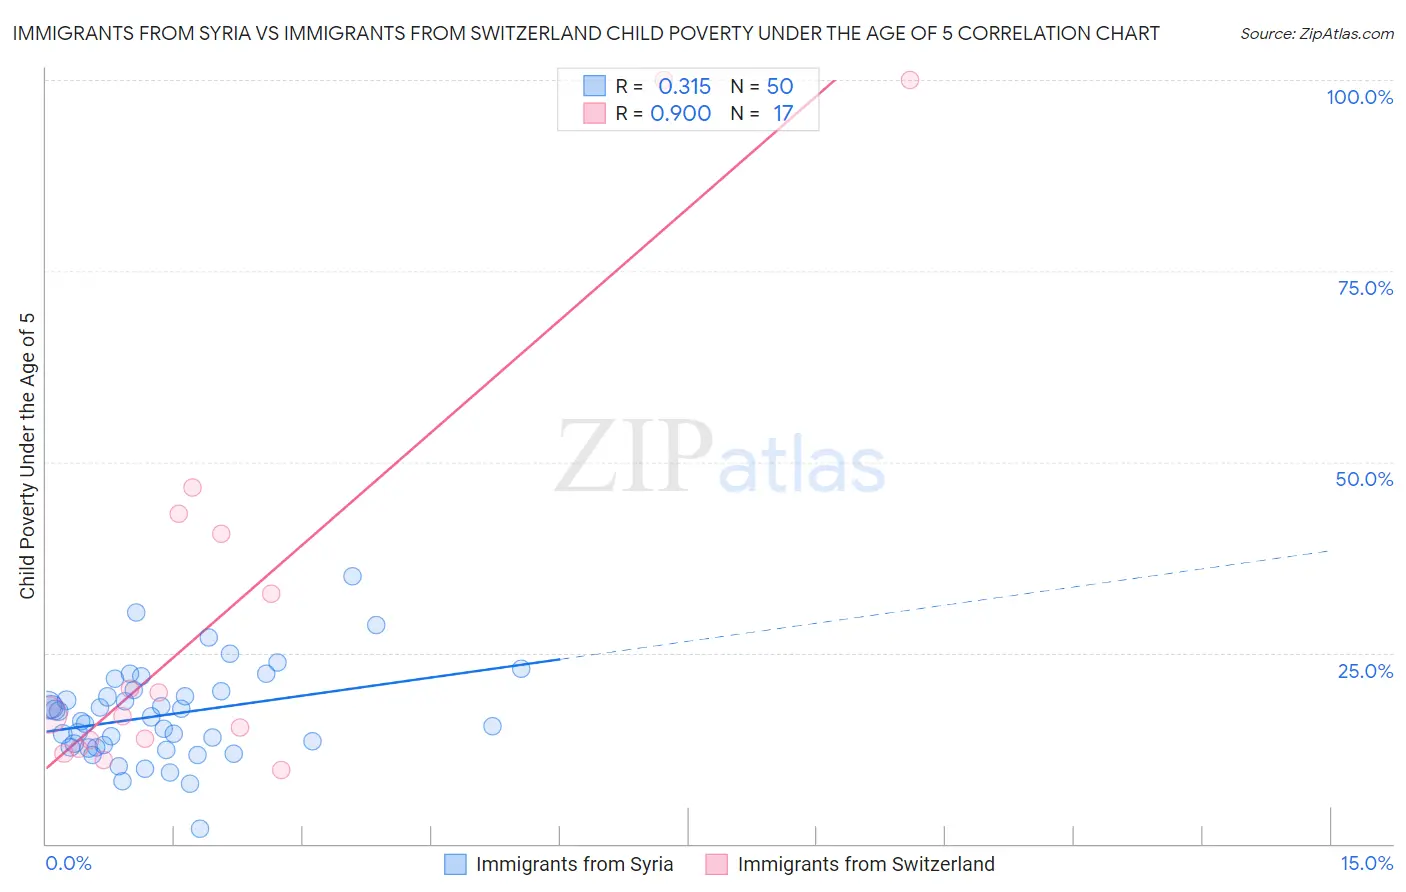 Immigrants from Syria vs Immigrants from Switzerland Child Poverty Under the Age of 5